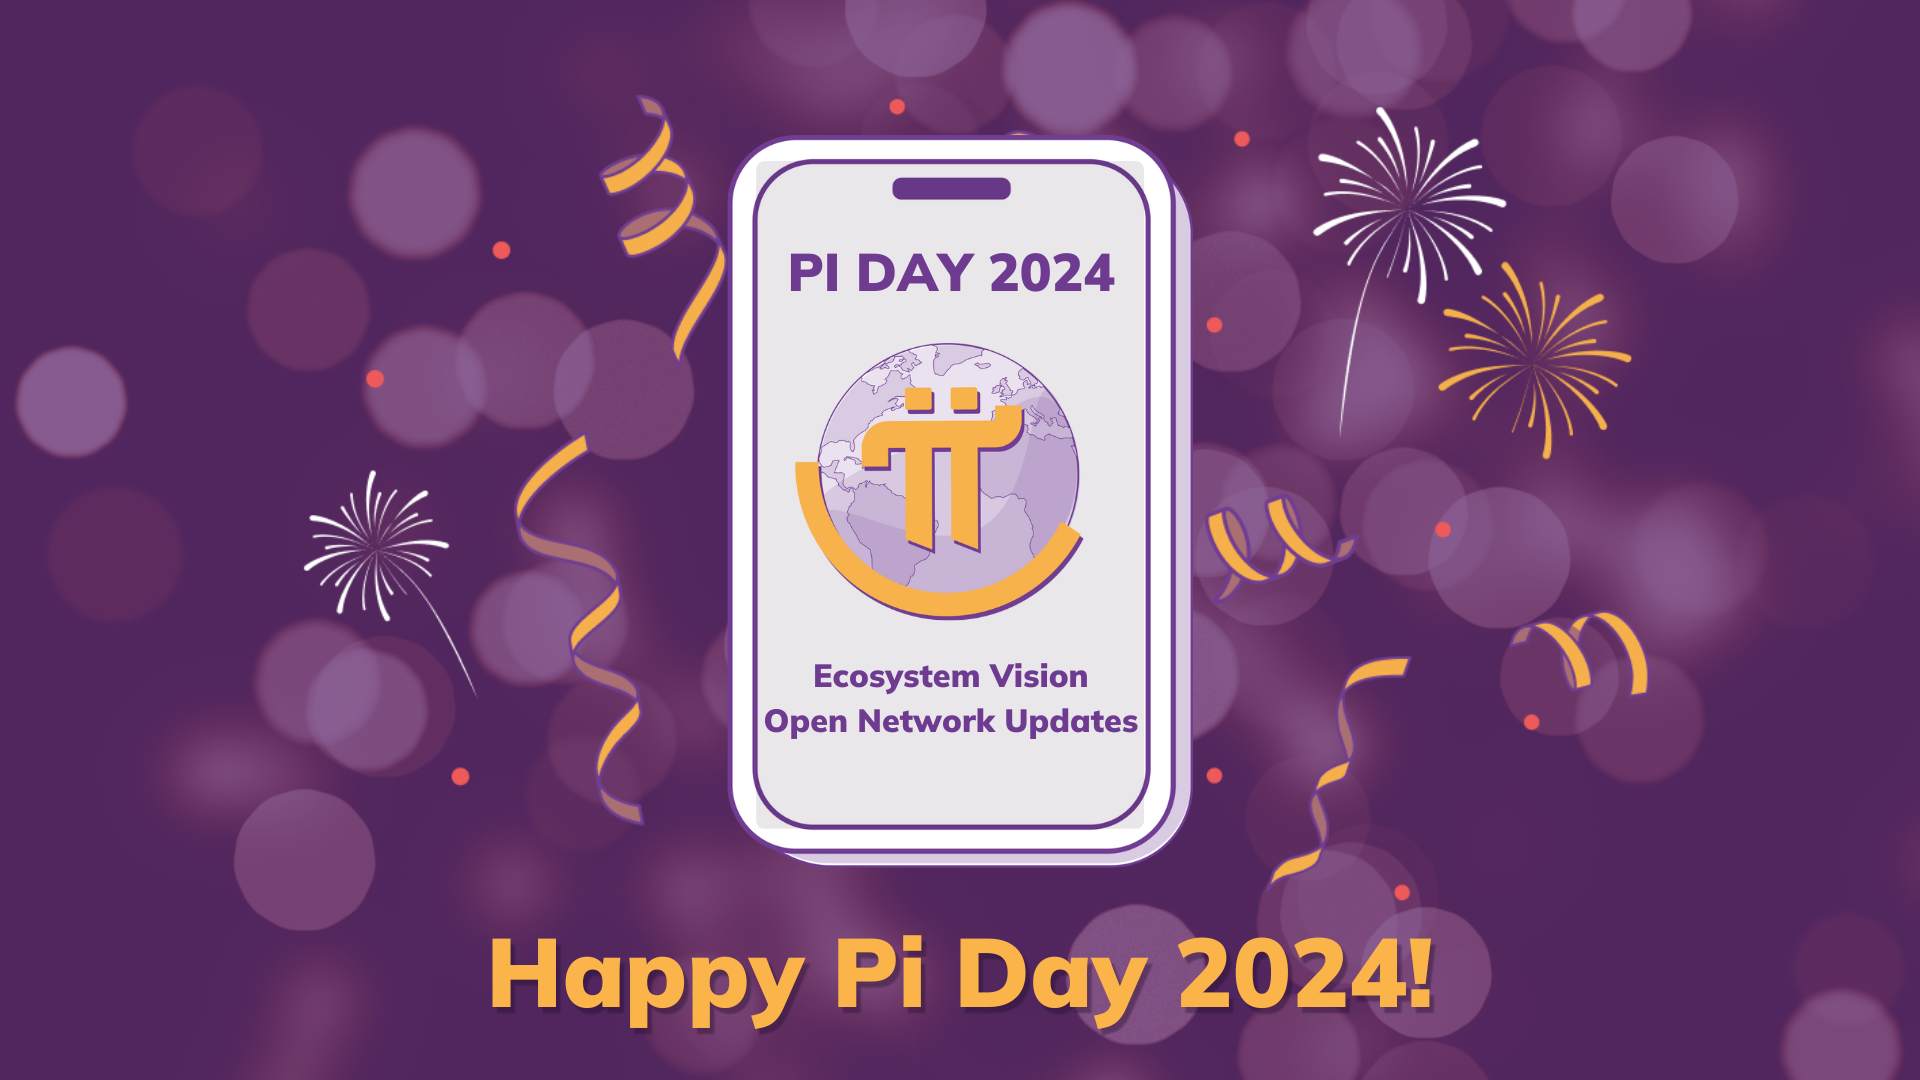 Pi Day 2024: The Pi Ecosystem Coming Together